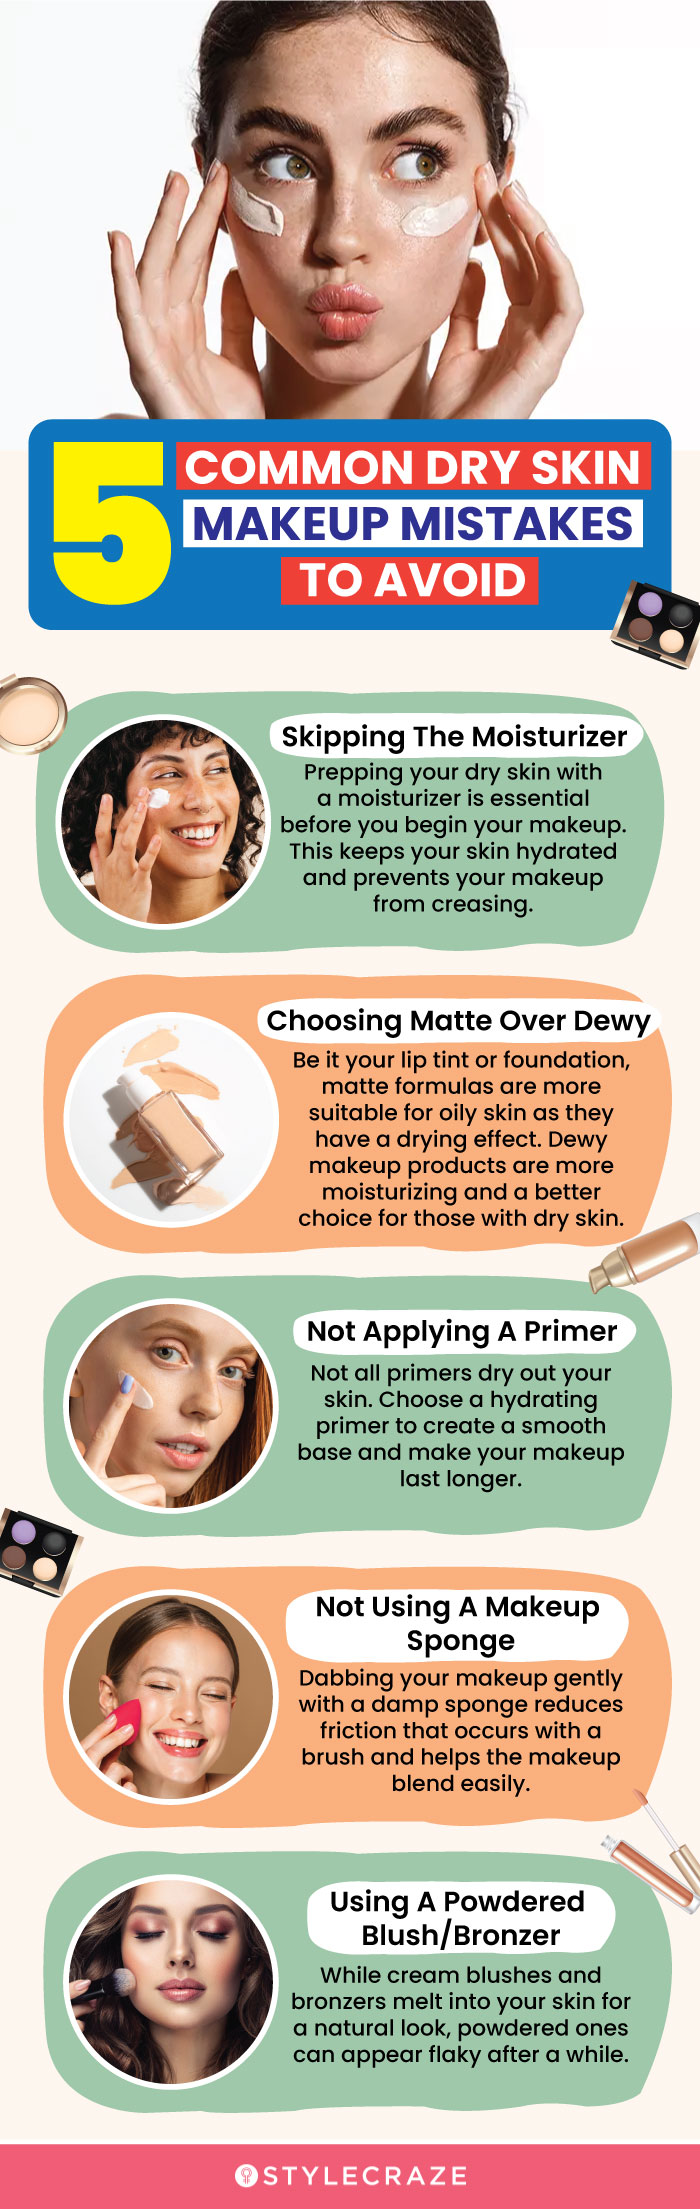 5 common dry skin makeup mistakes to avoid (infographic)